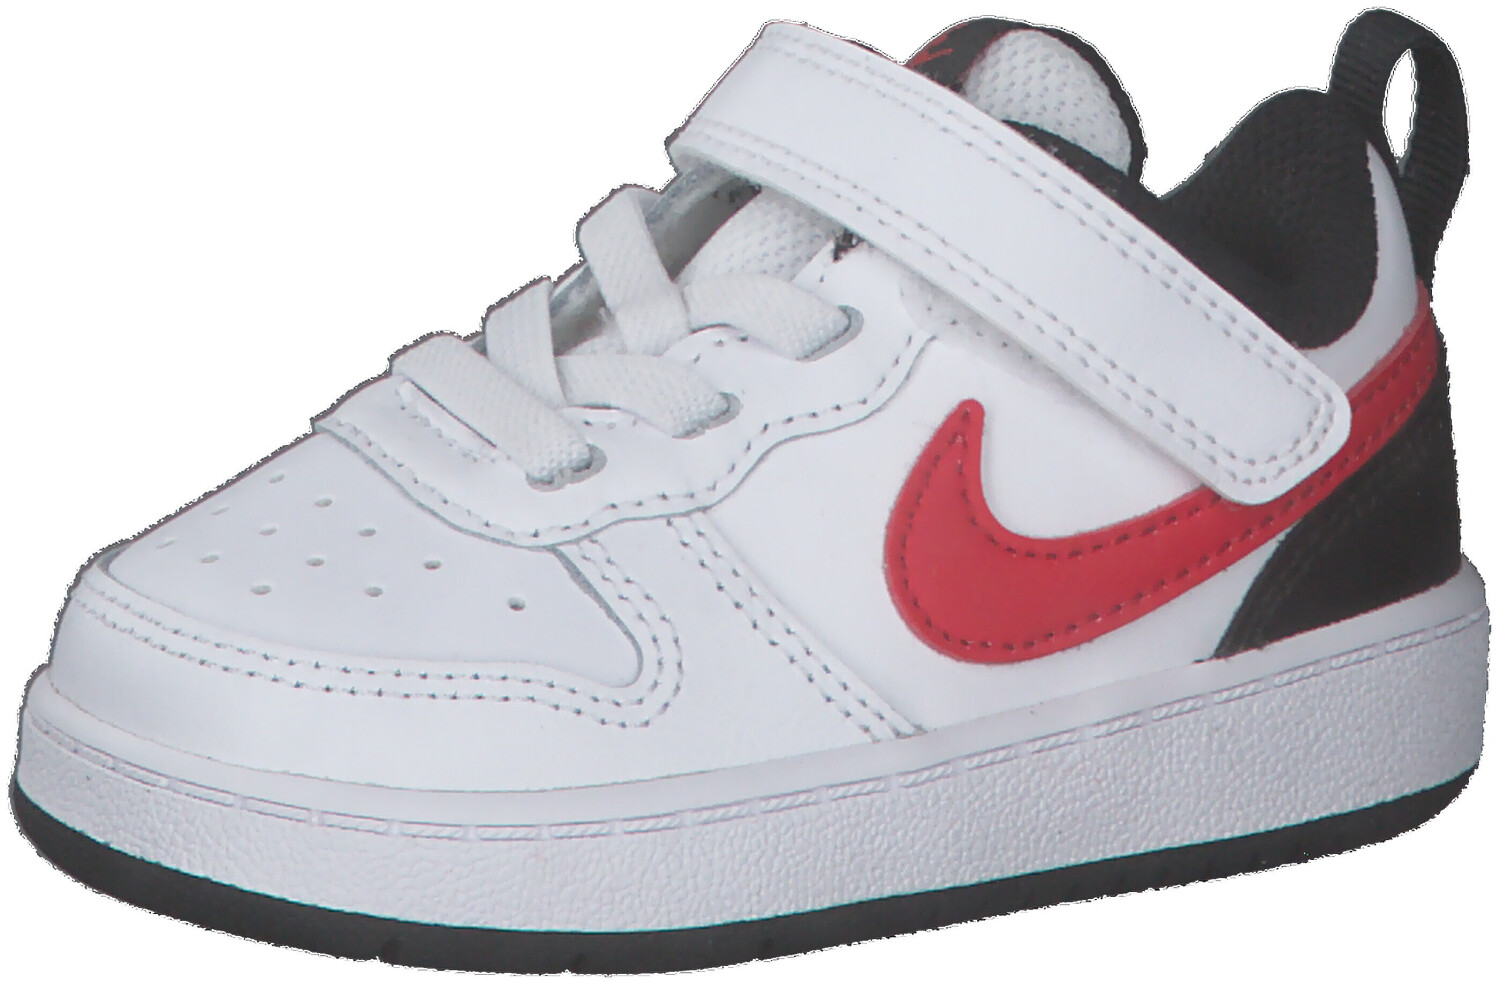 Buy Nike Court Borough Low 2 white/black/university red from £26 12